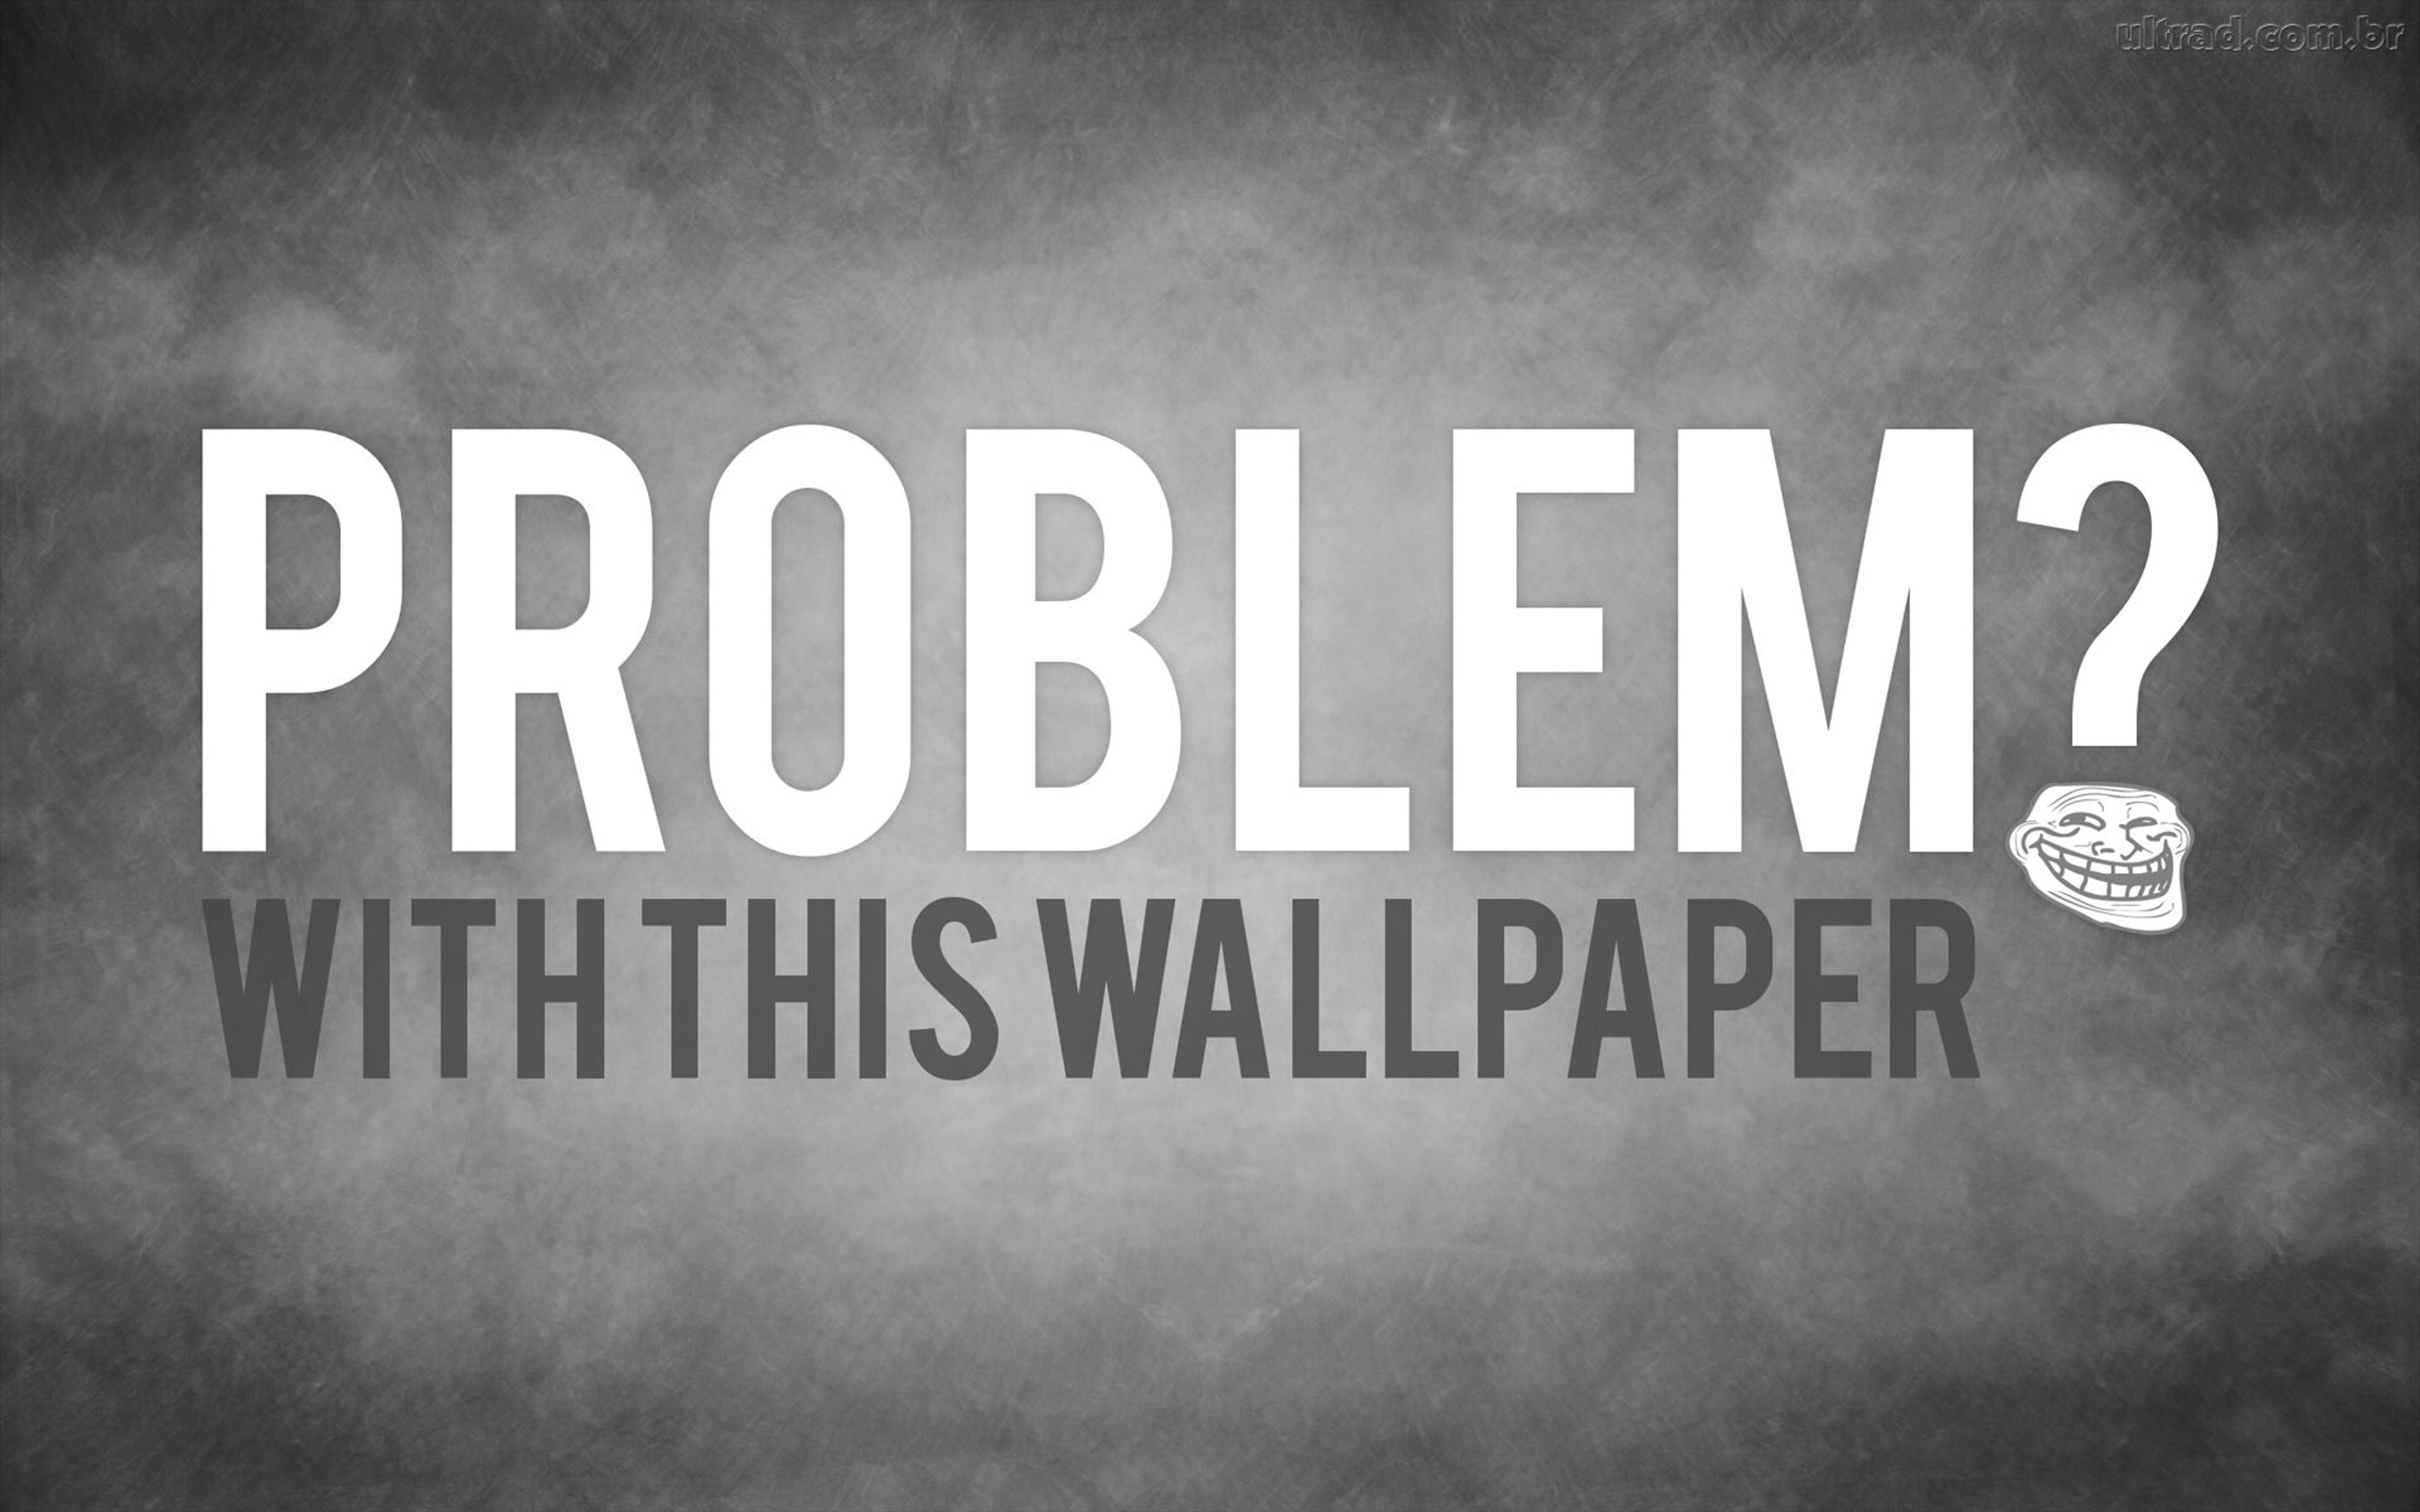 Do you have a problem with this wallpaper - Funny wallpaper